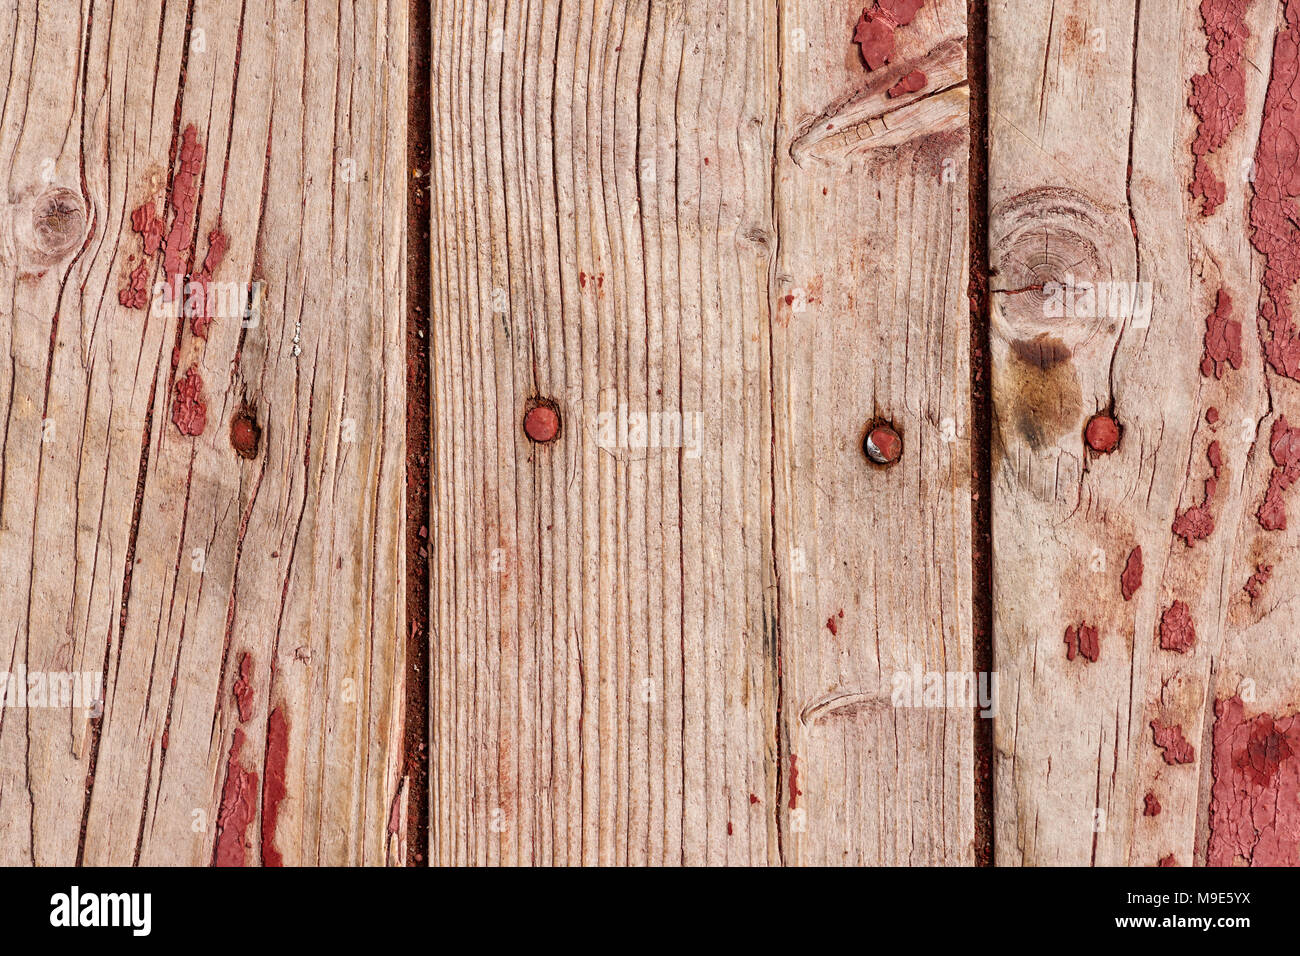 Grunge, weathered vertical wooden planks with a traces of old red or purple paint, nail heads visible Stock Photo